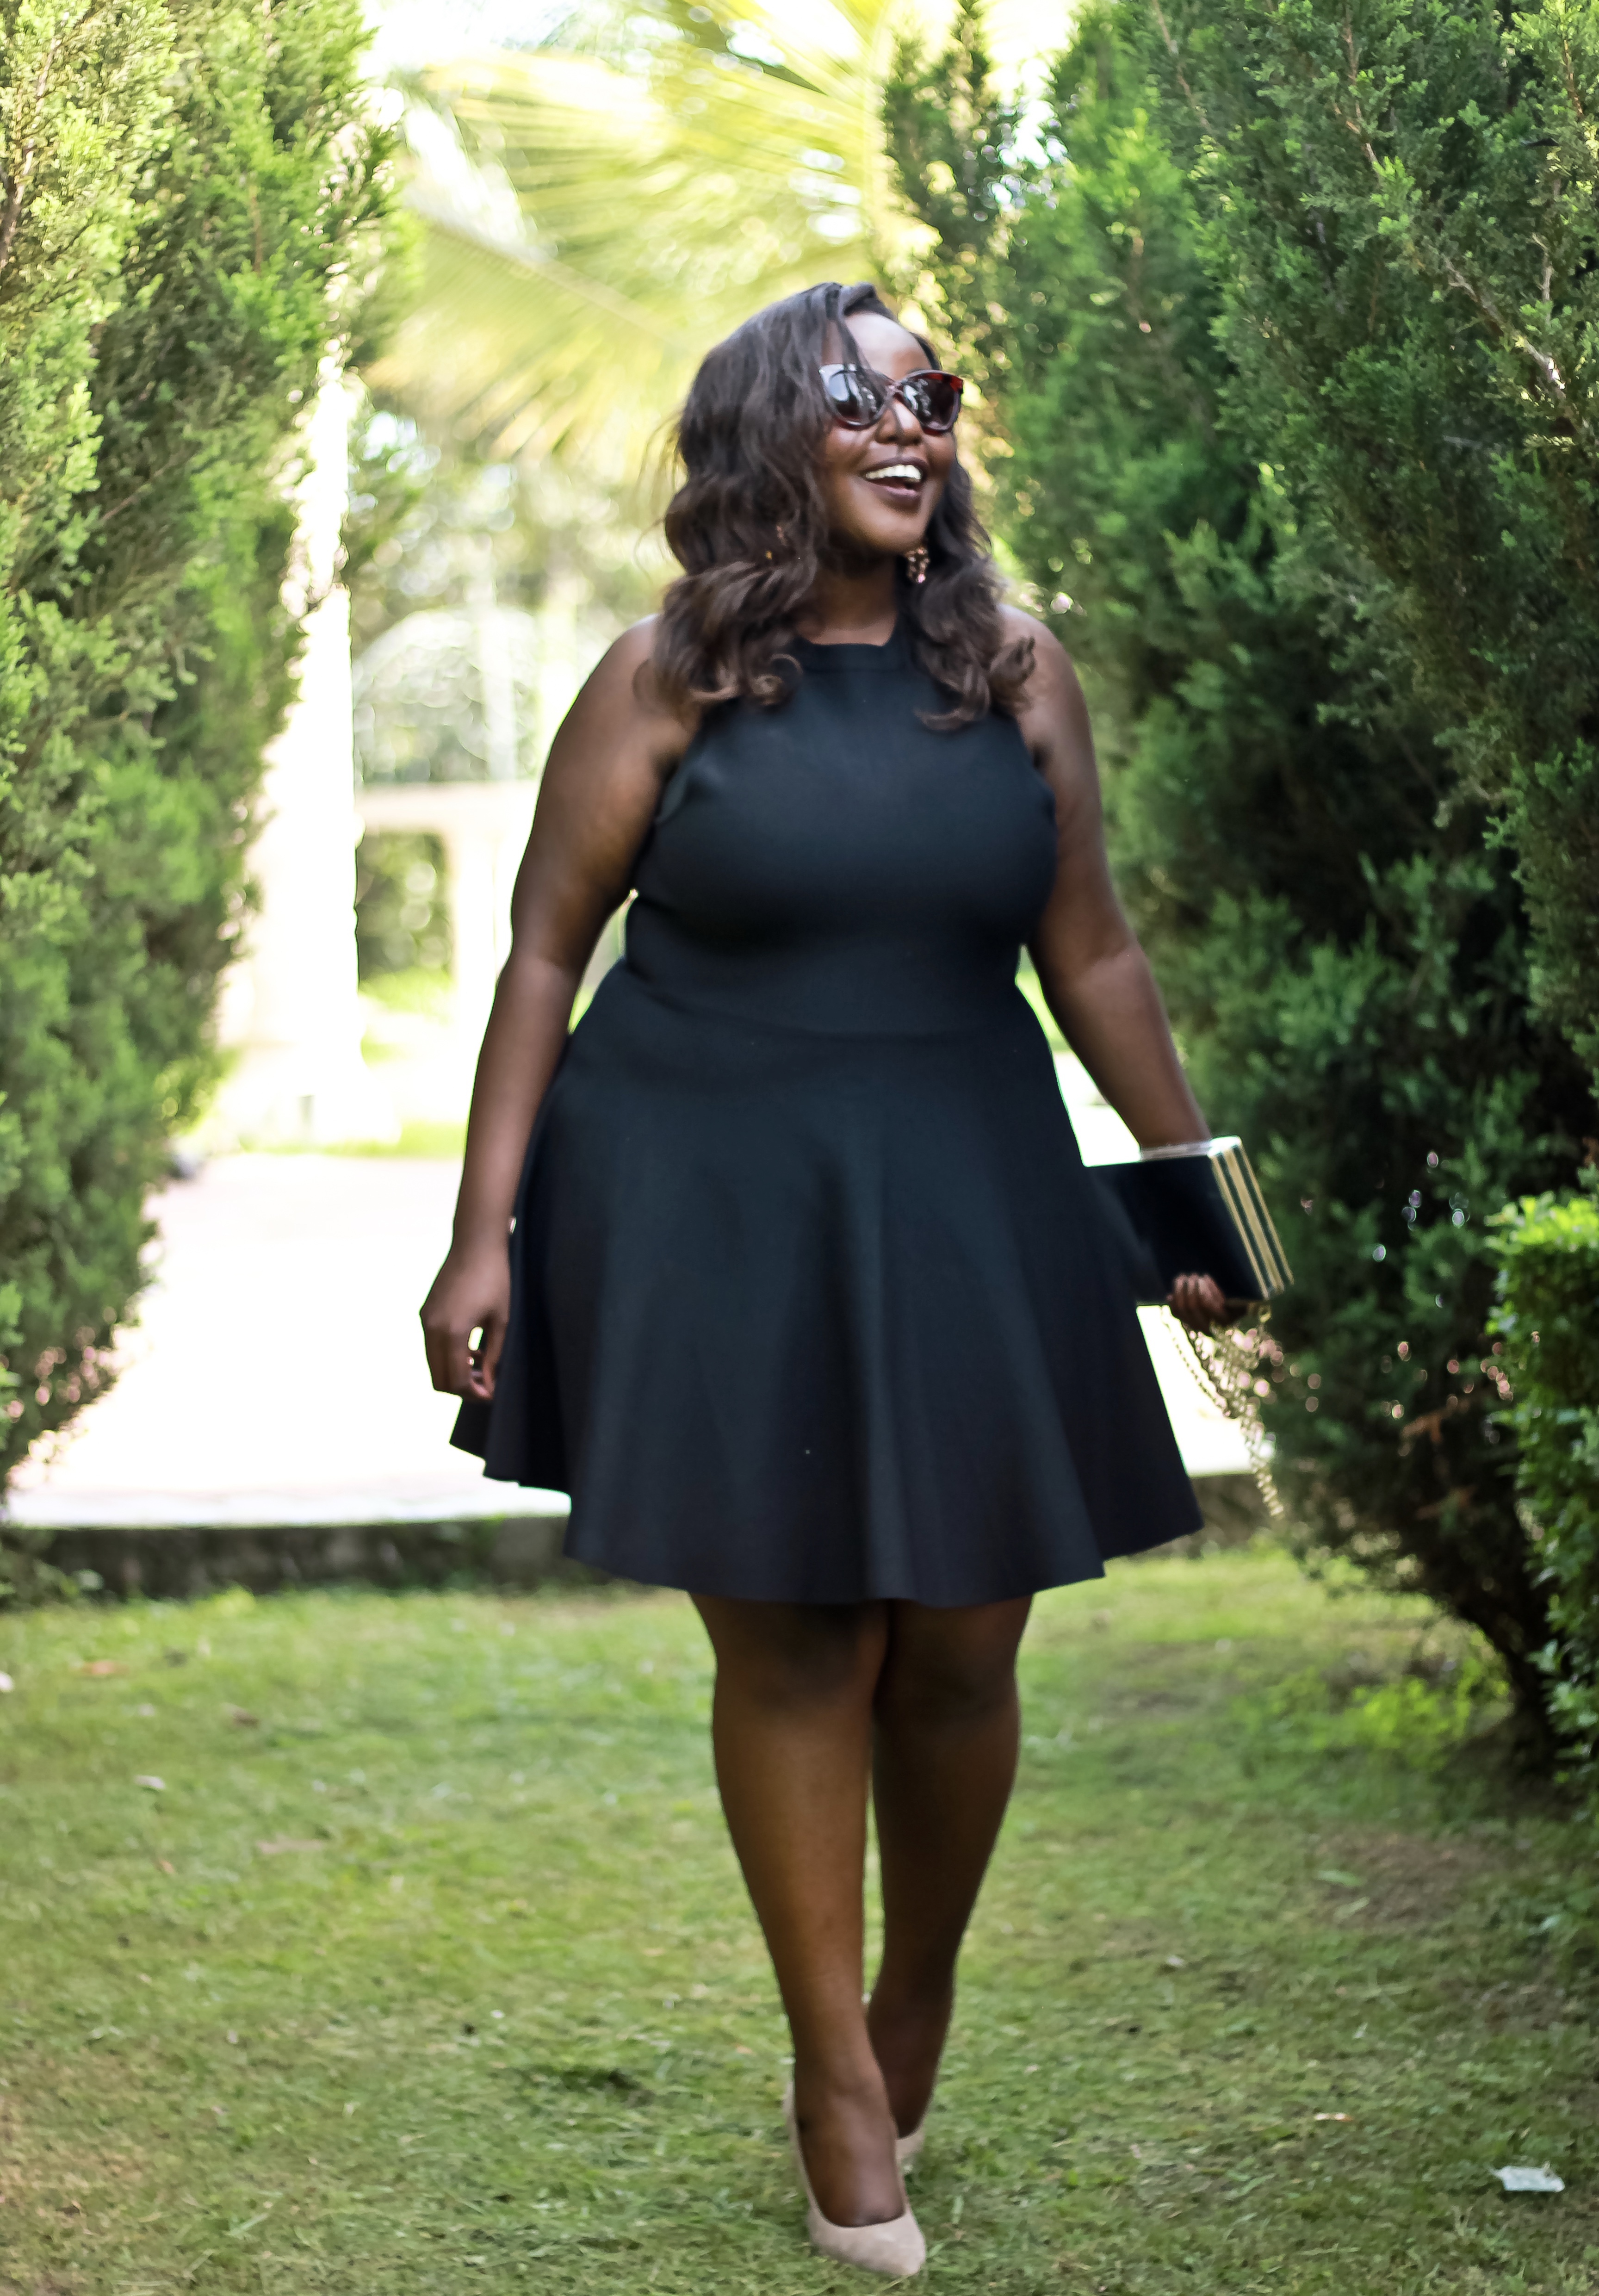 little black dress, introvert tips, tricks, preppy plus size fashion blogs 2017, beautiful curvy girls, how to fill the eye brow of a dark skin, beautiful plus size dark skin girls, plus size black bloggers, clothes for curvy girls, curvy girl fashion clothing, plus blog, plus size fashion tips, plus size women blog, curvy women fashion, plus blog, curvy girl fashion blog, style plus curves, plus size fashion instagram, curvy girl blog, bbw blog, plus size street fashion, plus size beauty blog, plus size fashion ideas, curvy girl summer outfits, plus size fashion magazine, plus fashion bloggers, zara, Rosie the riveter shirt; Emilia embroidered beaded clutch; Vince Camuto heels; Lula shell drop earrings; Aldo Galigossi sunnies,